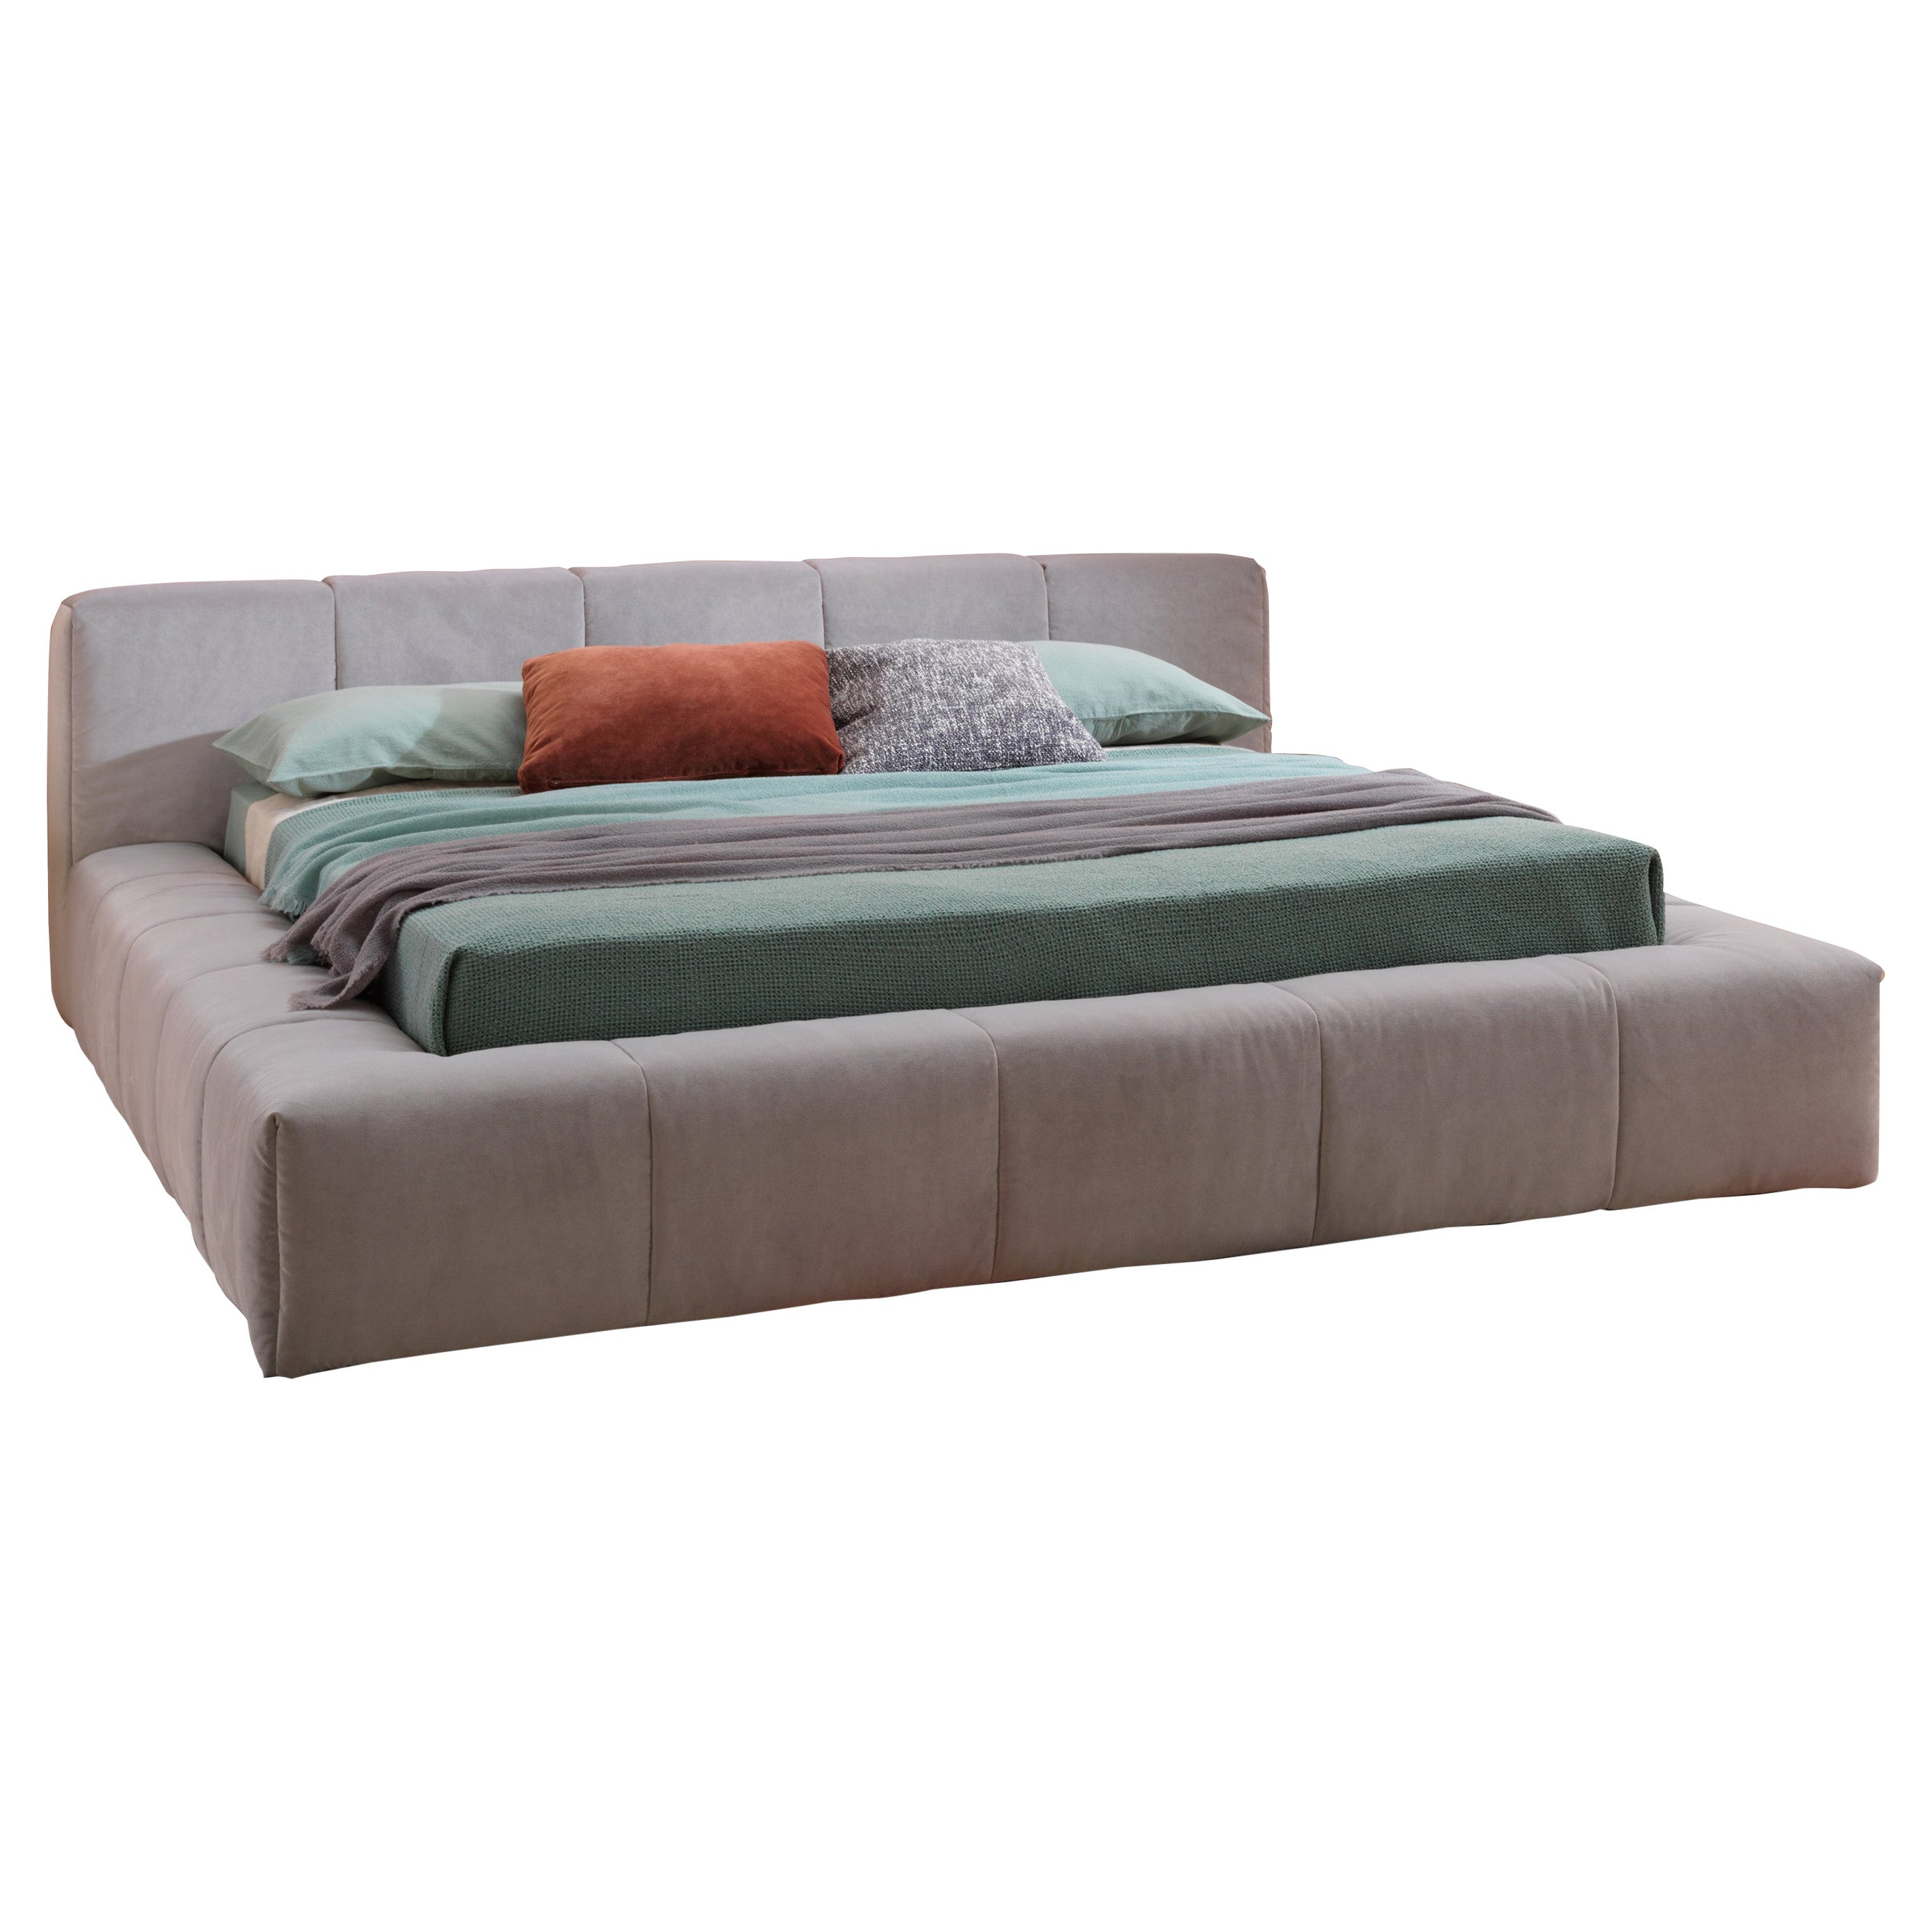 Pixel Box Large Queen Size Bed in Velvet Upholstery with Base by Sergio Bicego